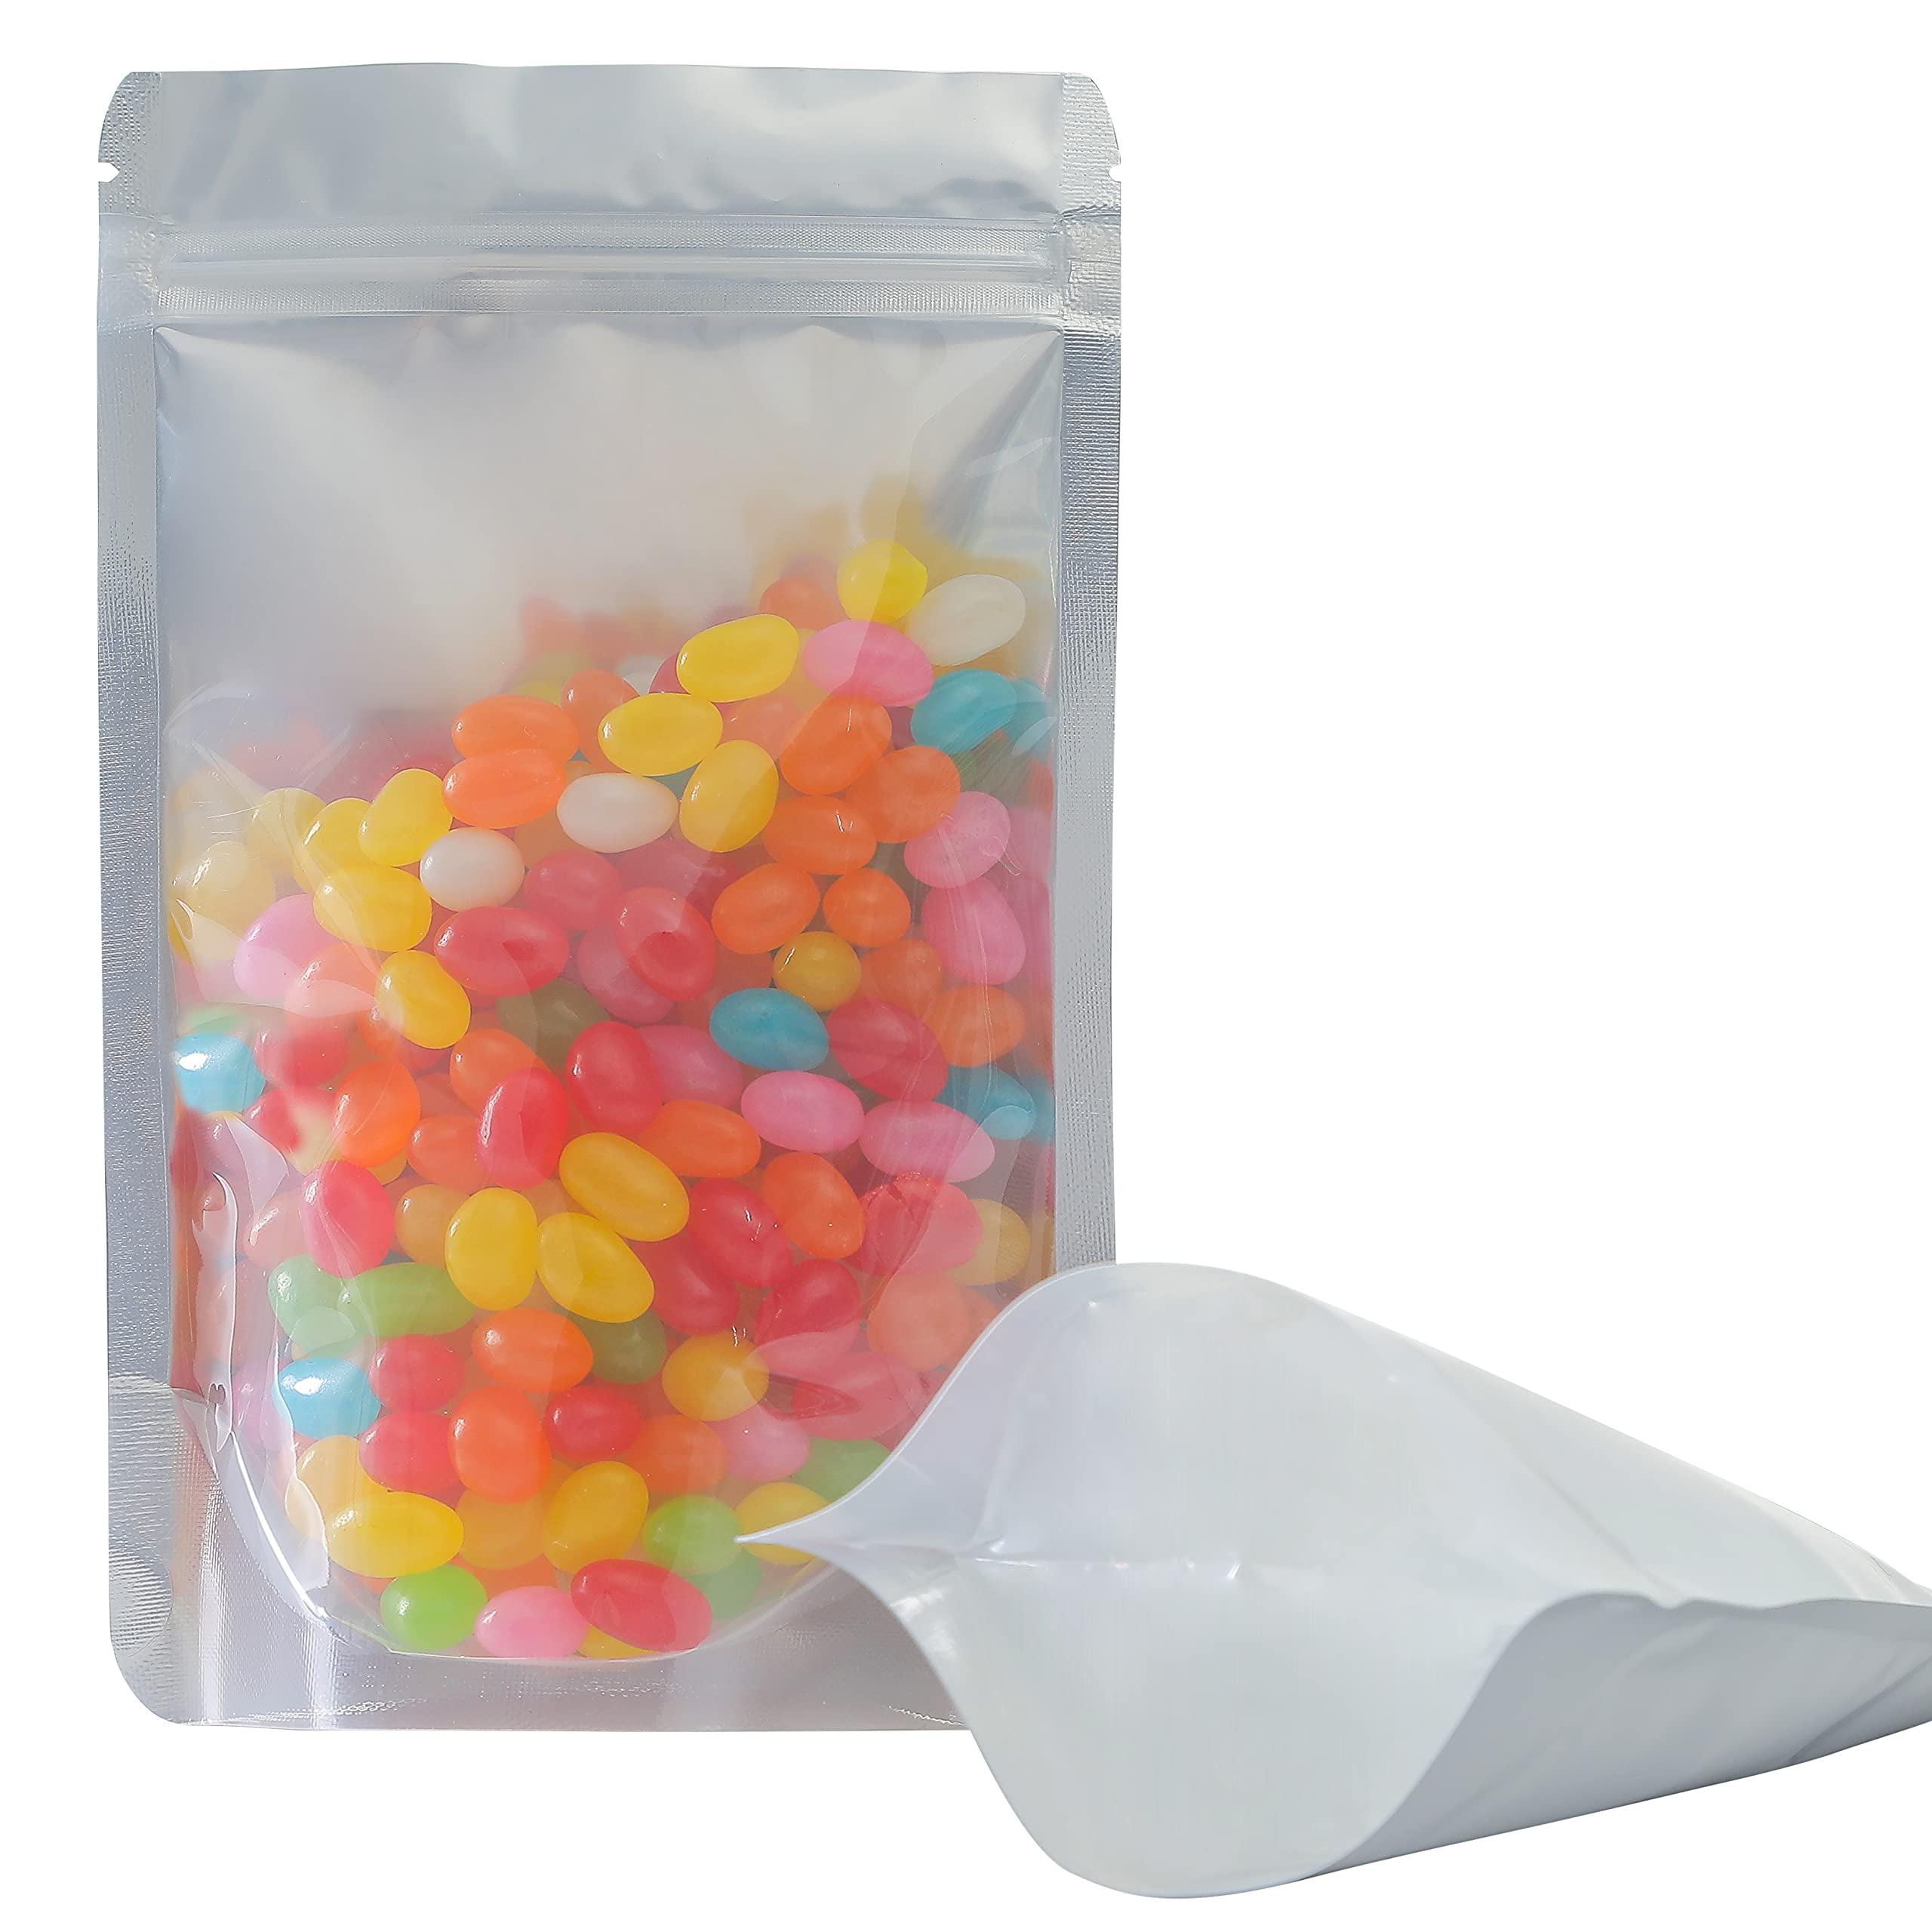 3x4 4x6 5x7cm Ziplock Bag 200pcs Small Perforated Transparent Tag Pill Bag  Clothing Button Sample Pouches Newst